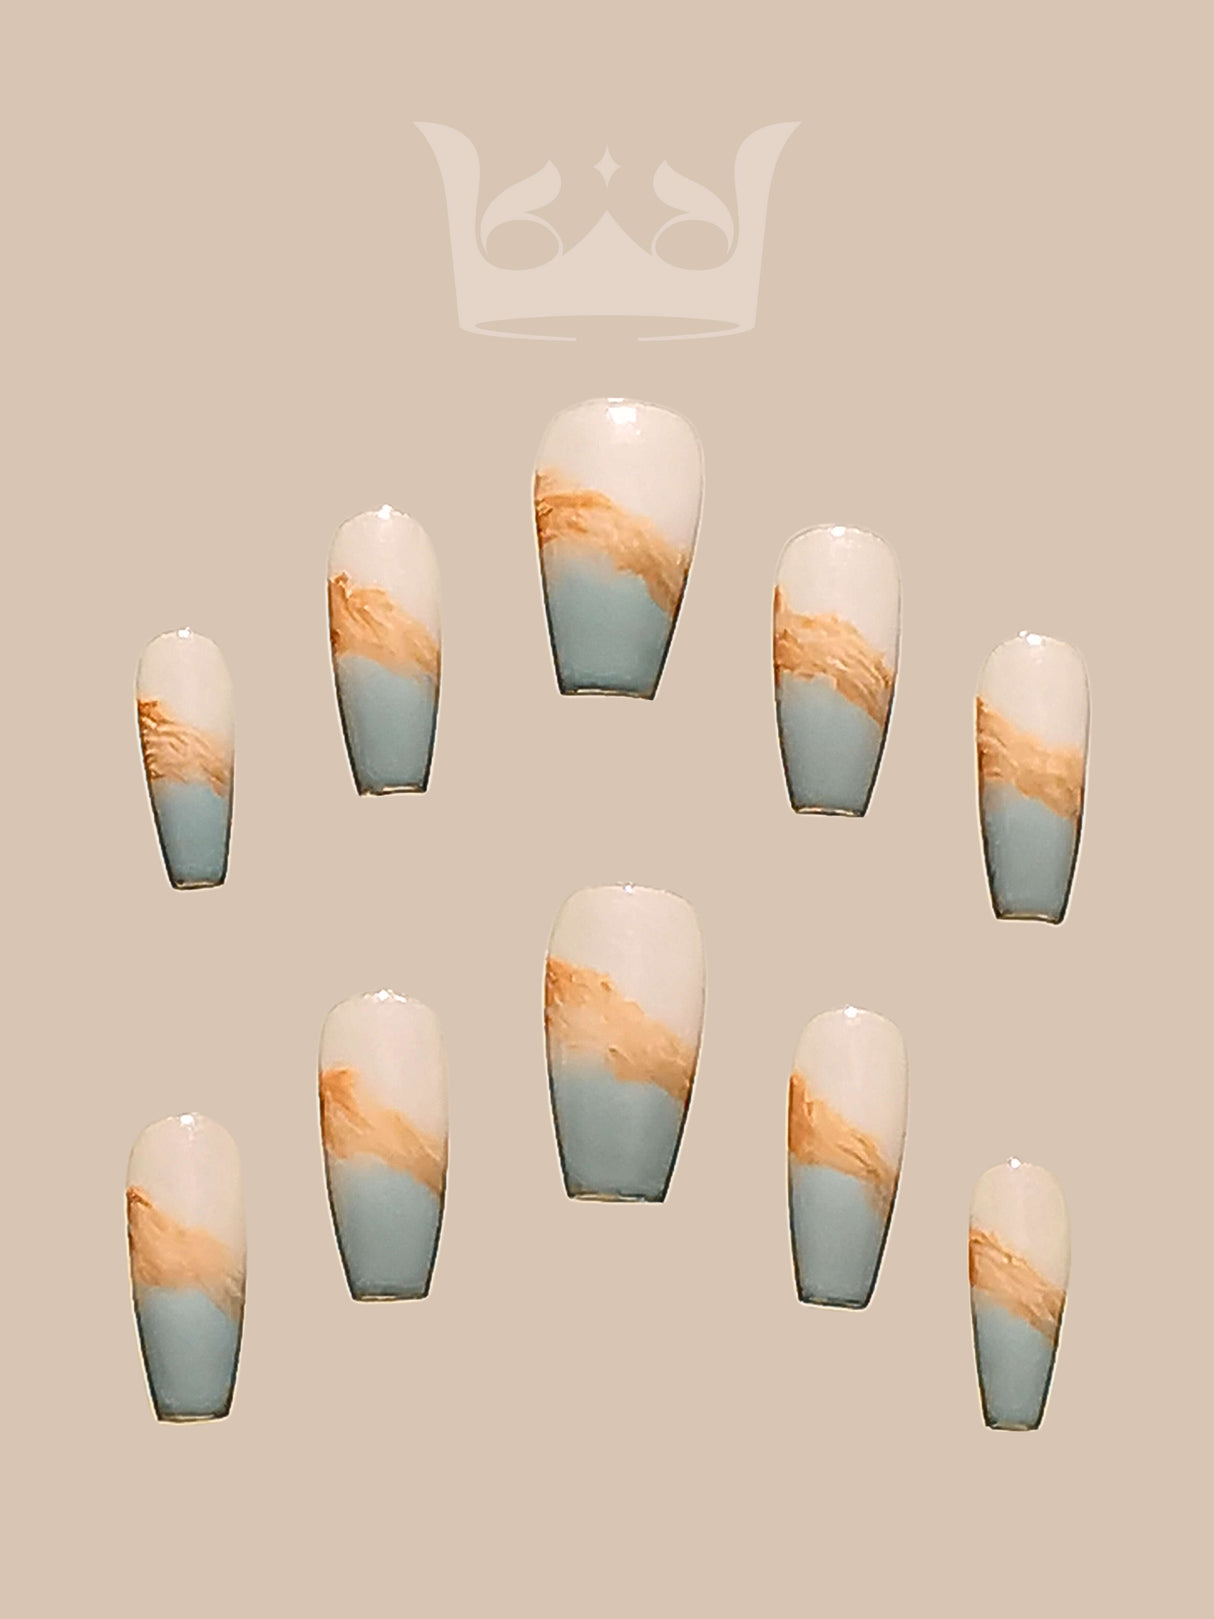 These press-on nails add an artistic touch to the overall look and are designed for anyone who wants a modern and stylish look with an elongated appearance.